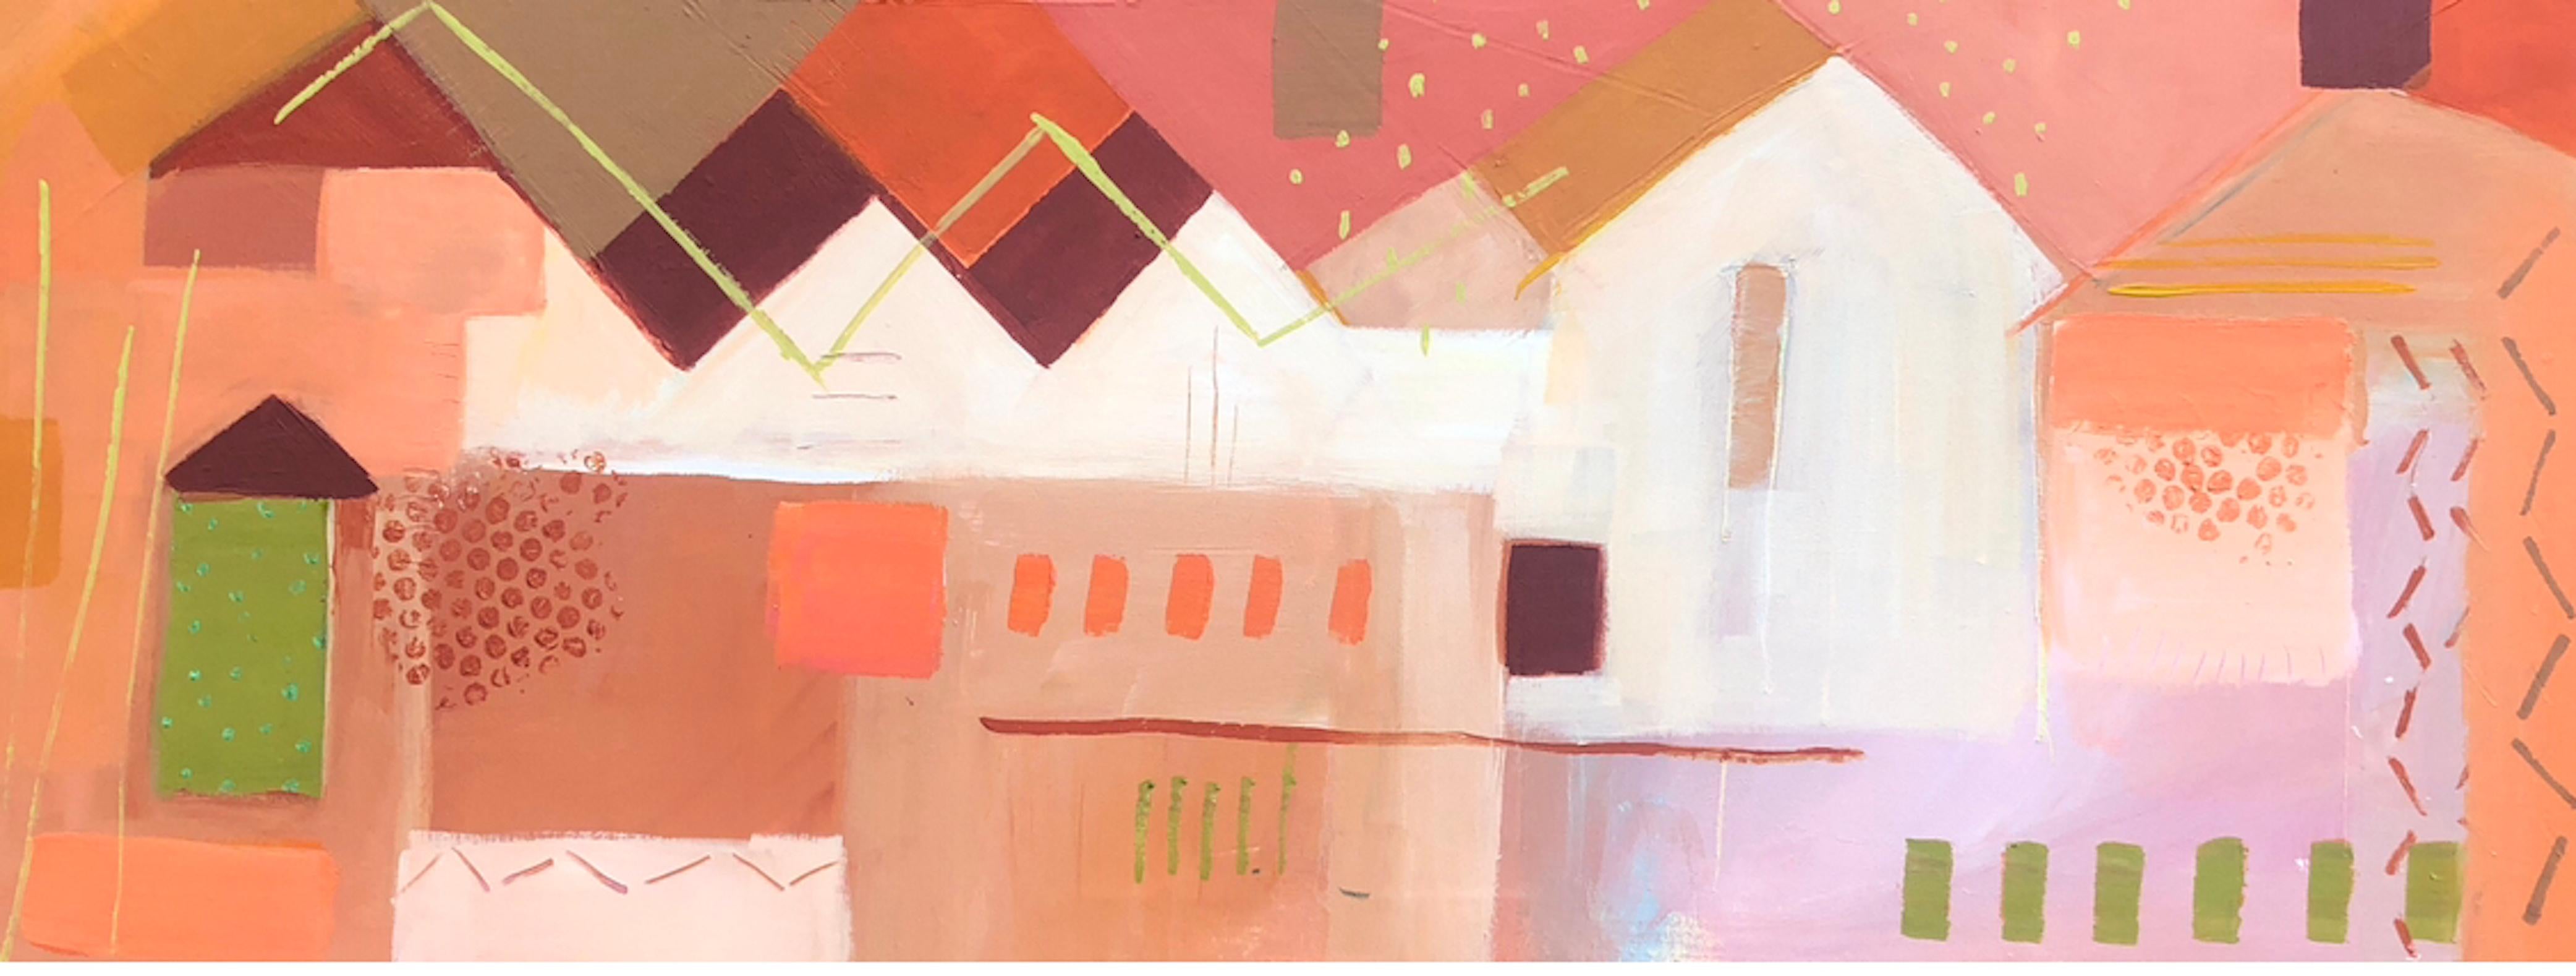 Bryggen Facades 6 by Maggie LaPorte-Banks, Original painting, Abstract Art, Pink